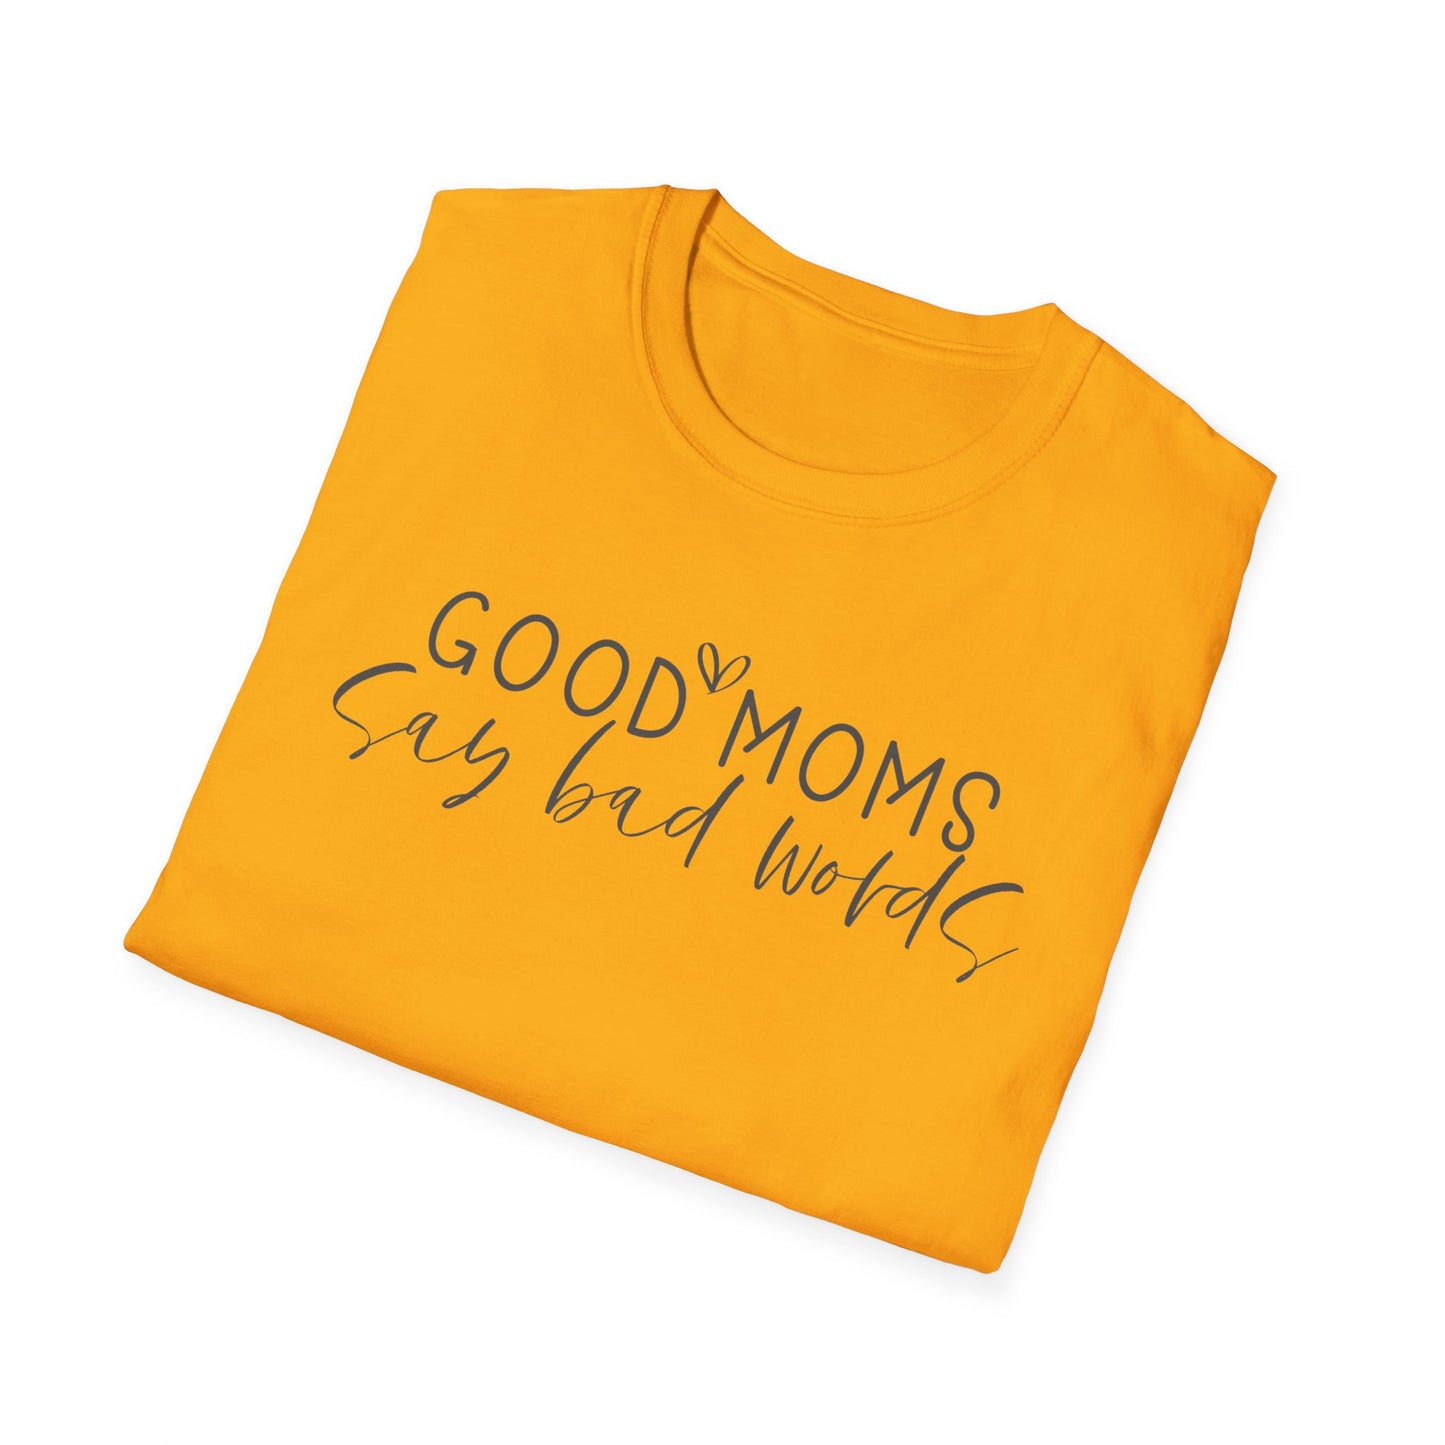 Good Moms Say Bad Words - Unisex Softstyle T-Shirt